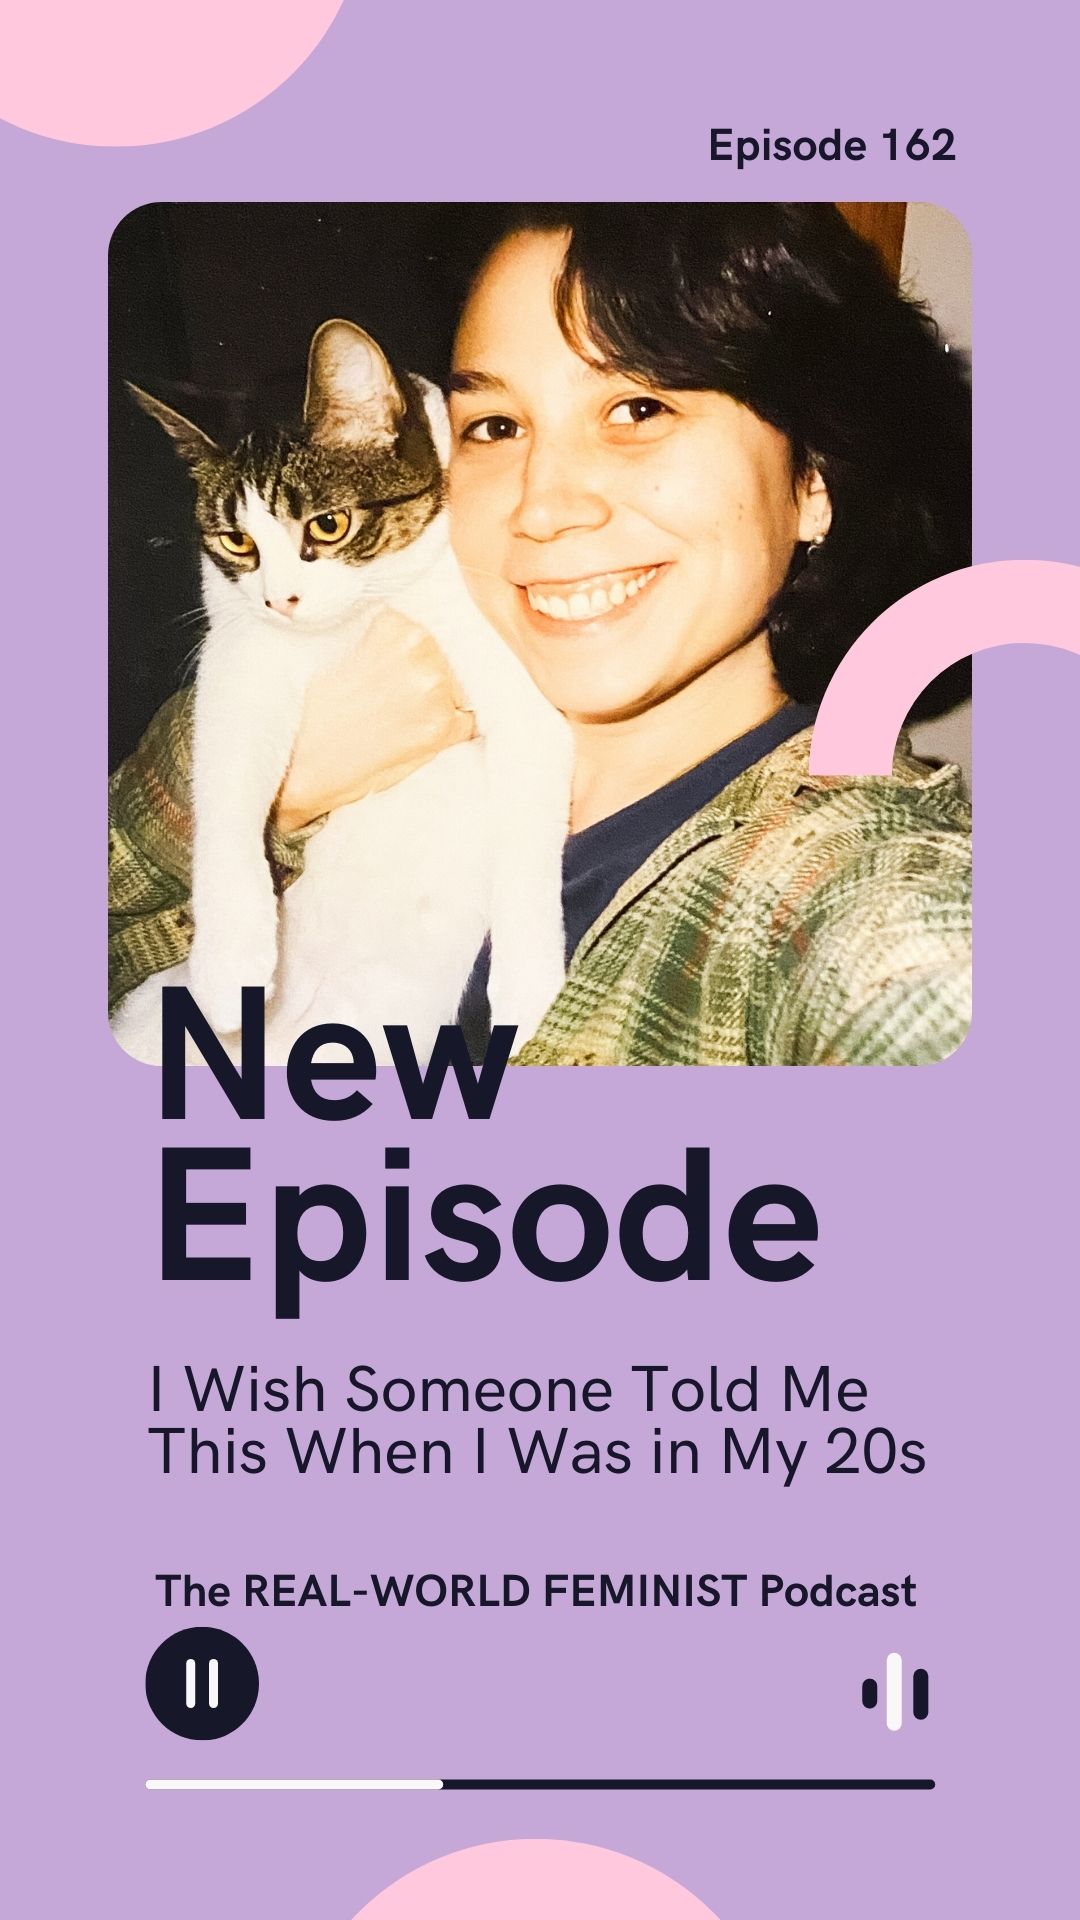 Episode #162: I Wish Someone Told Me This in My Twenties